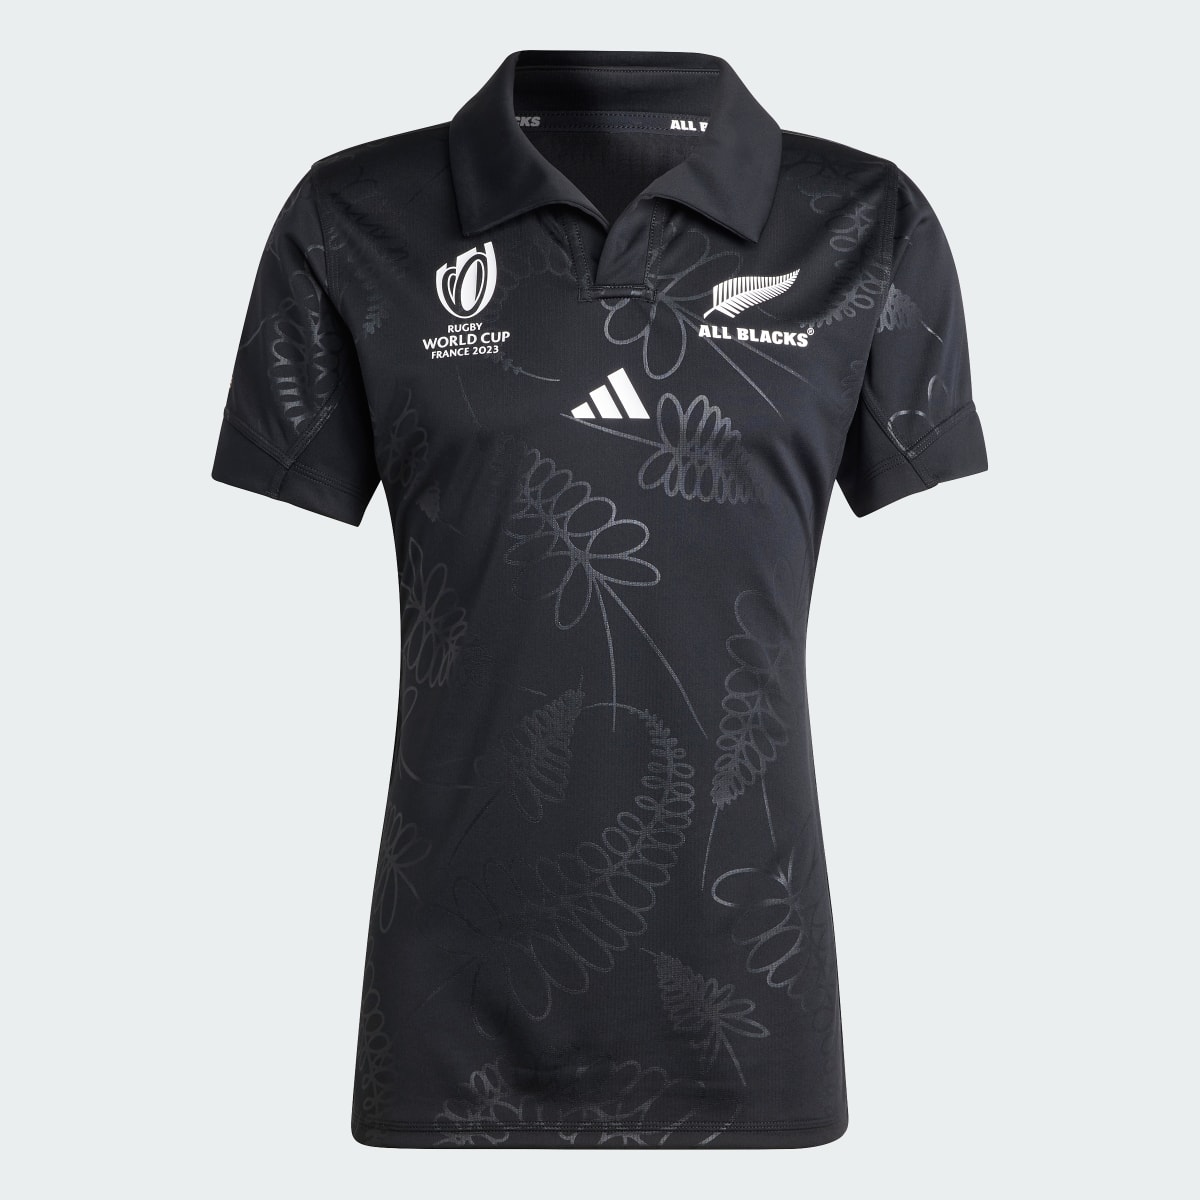 Adidas All Blacks Rugby Performance Home Jersey. 5